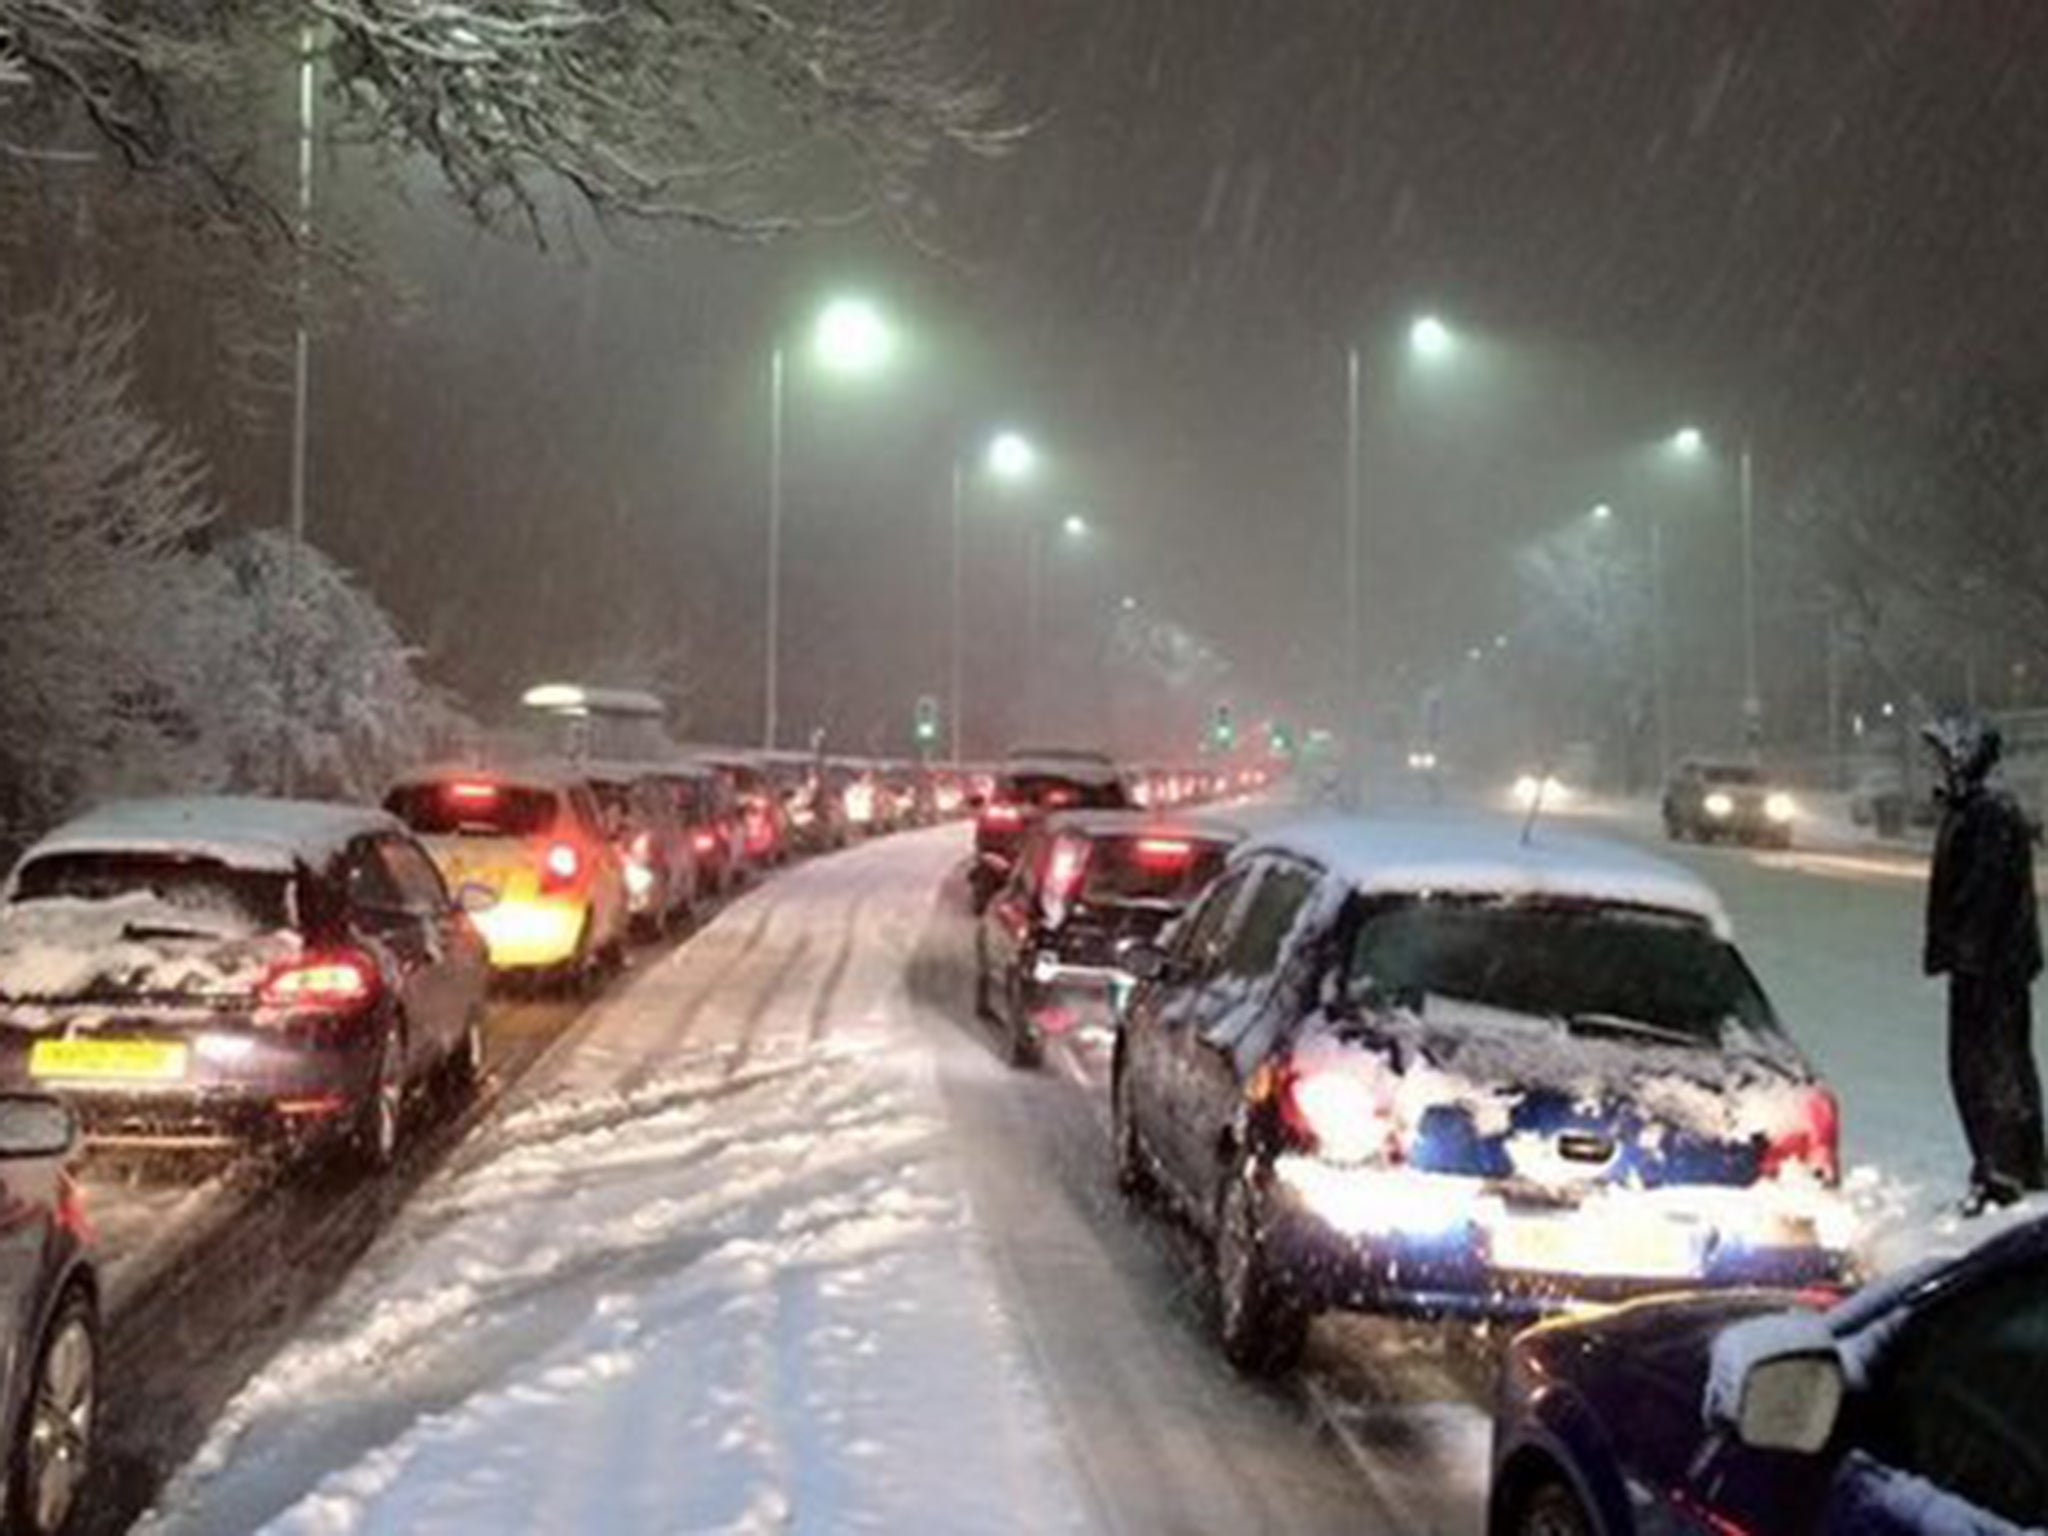 Traffic chaos on the roads in Sheffield due to snow